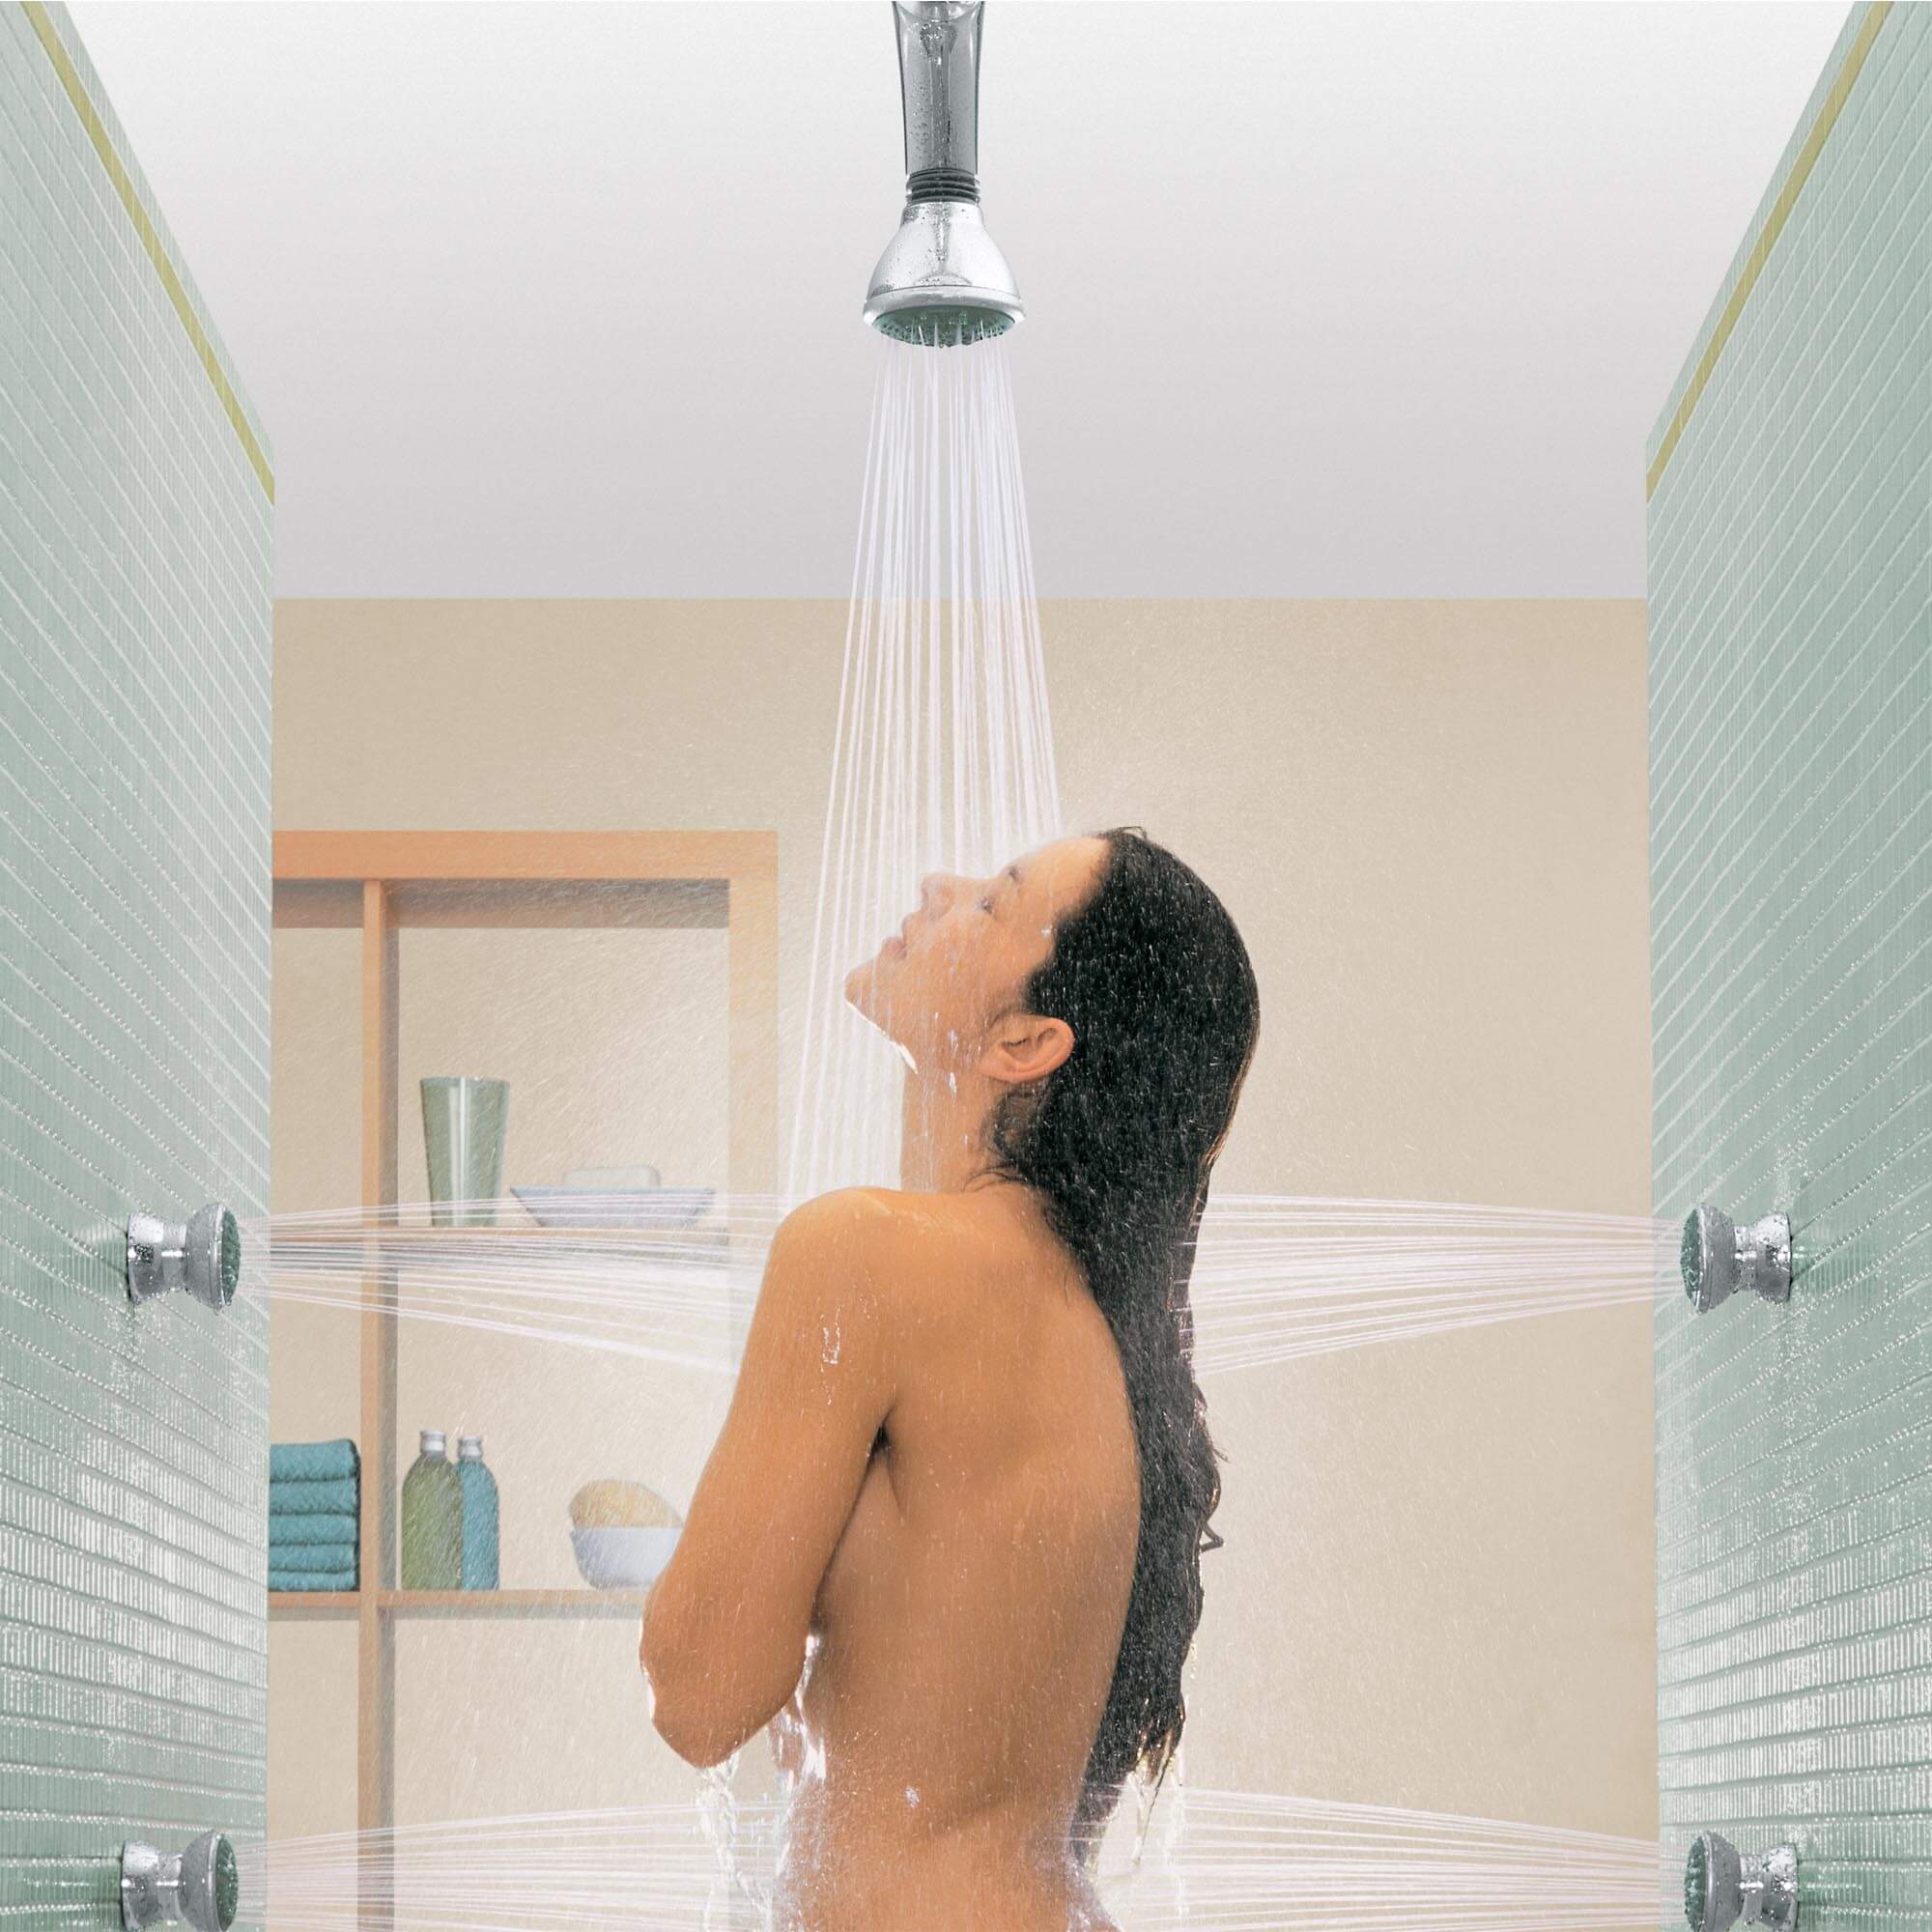 Movario Shower Collection - Woman in shower using ceiling showerhead and wall jet sprays